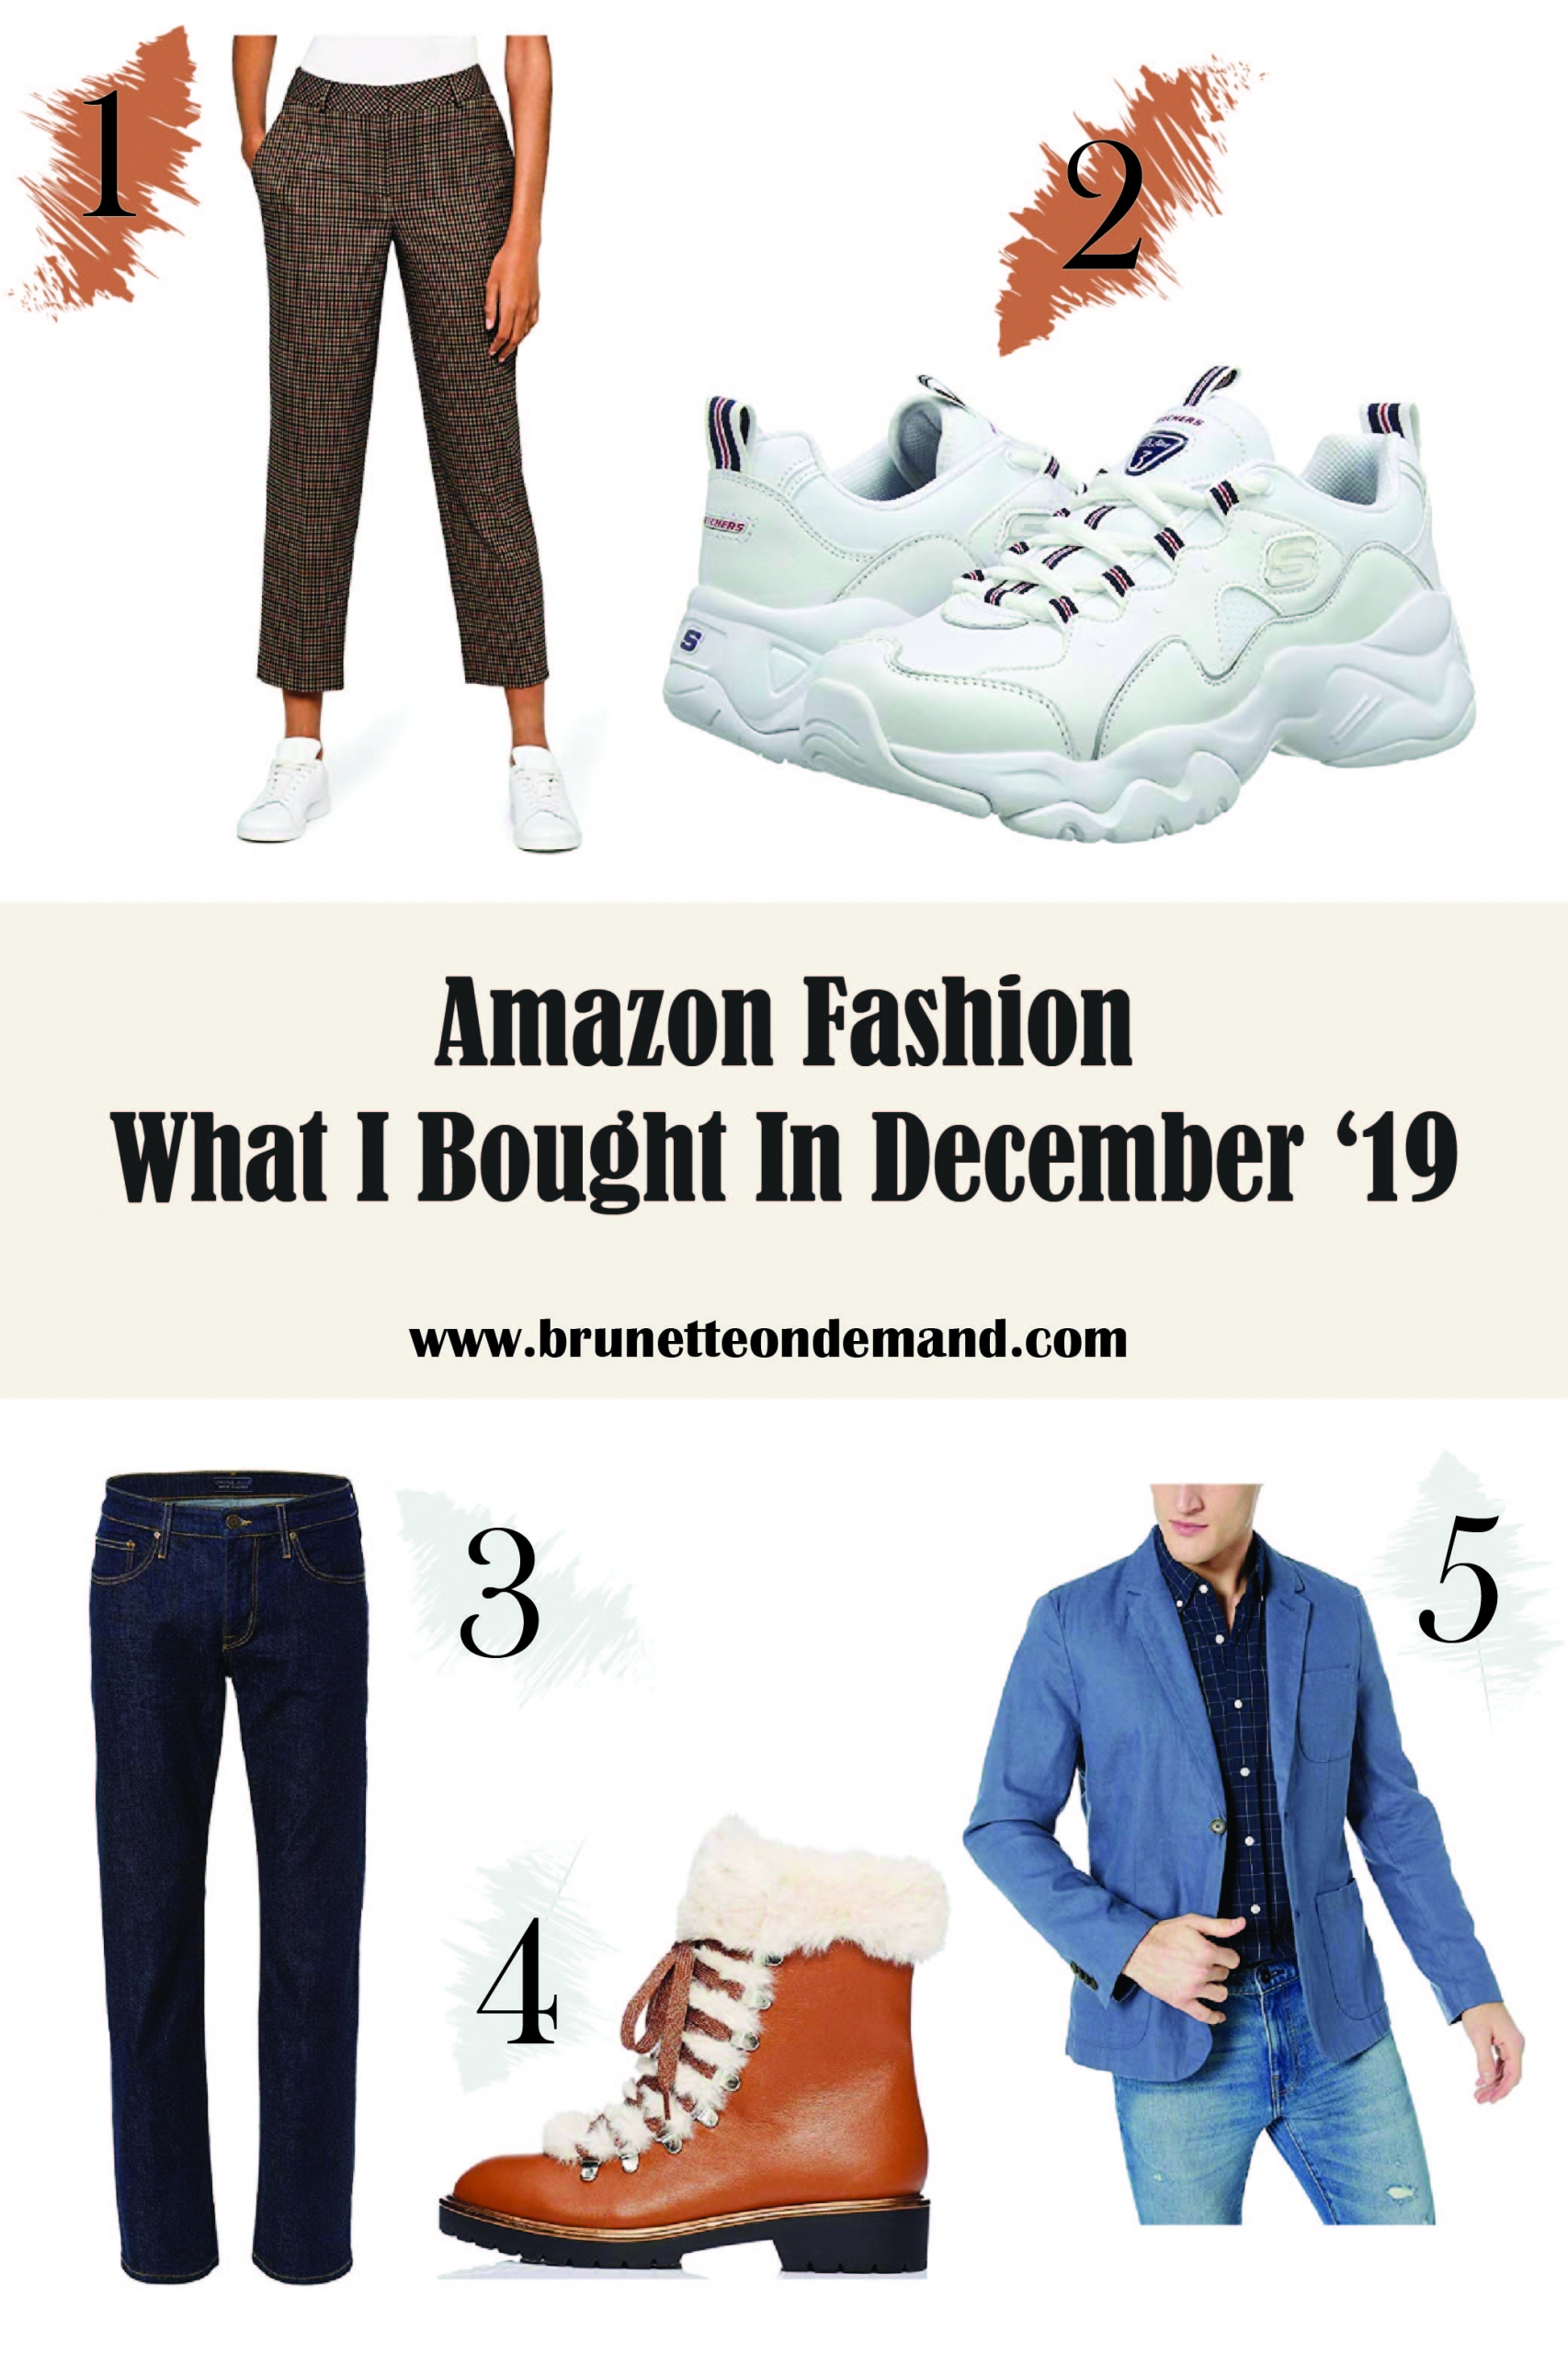 Amazon Fashion What I Bought In December '19